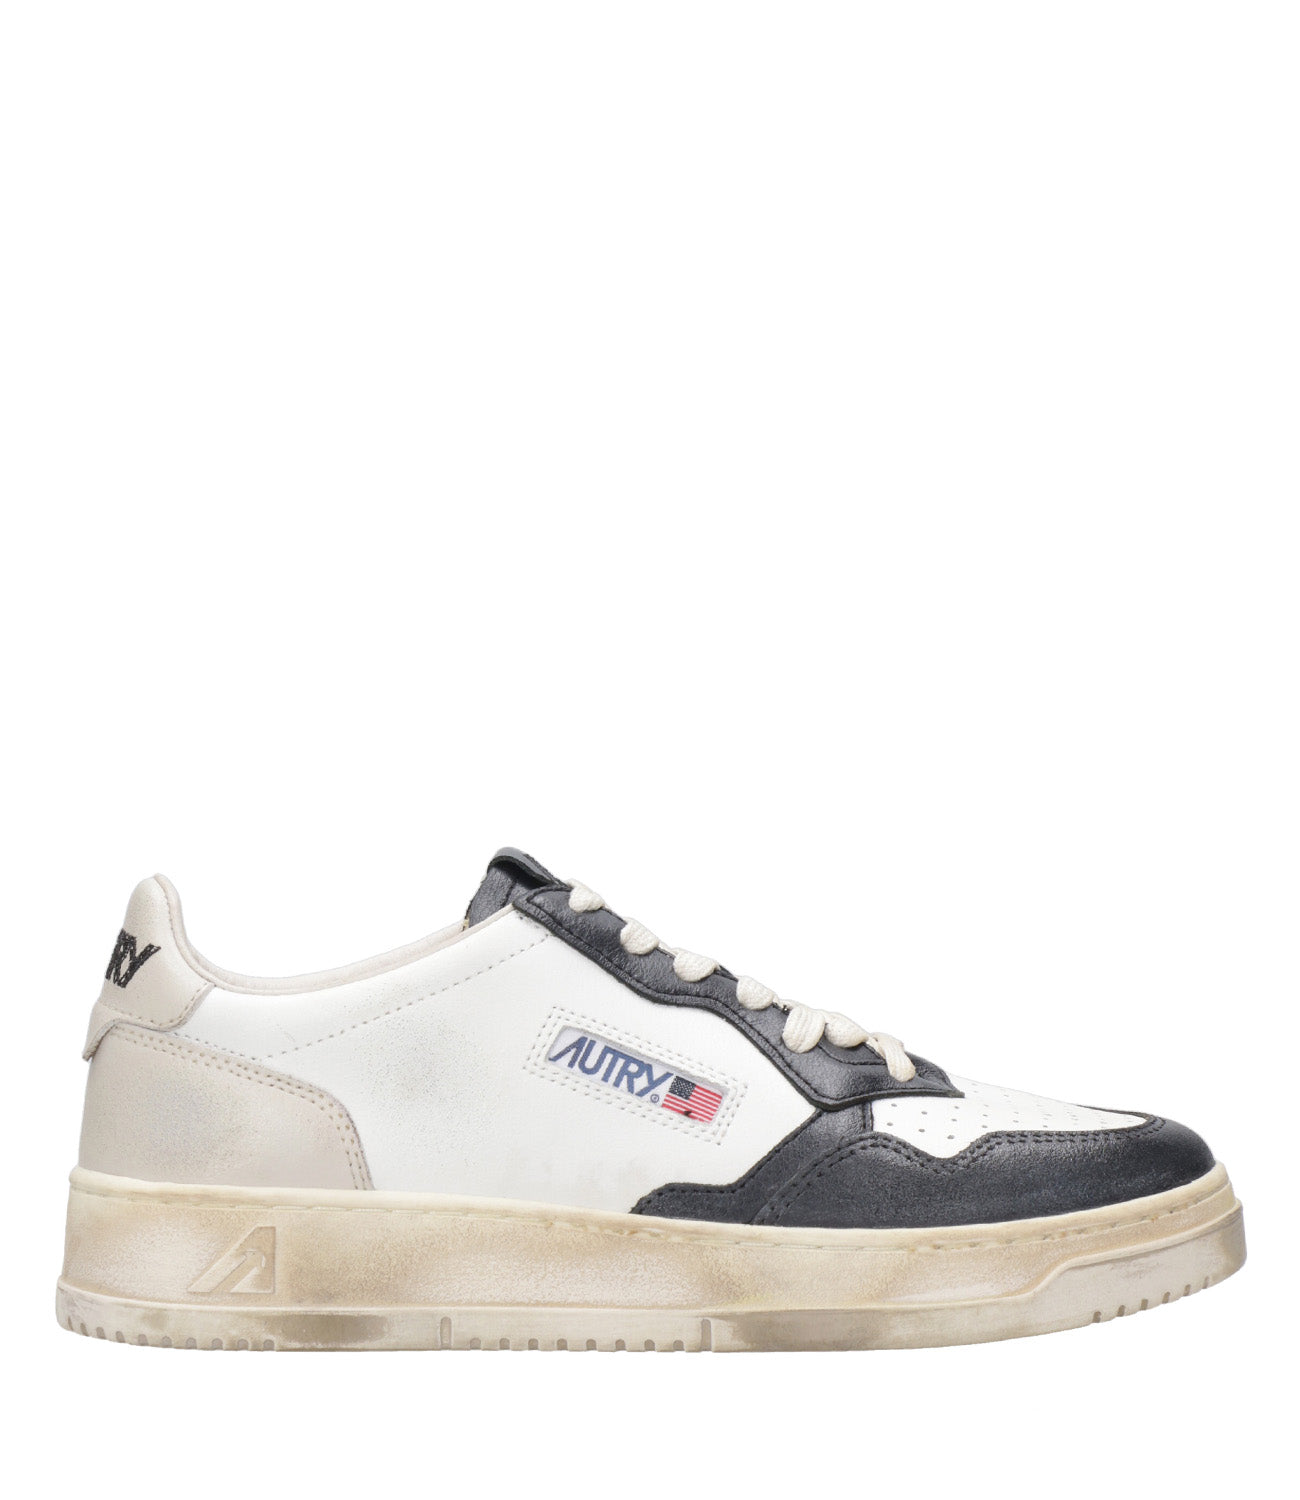 Autry | Super Vintage Low White and Black Sneakers